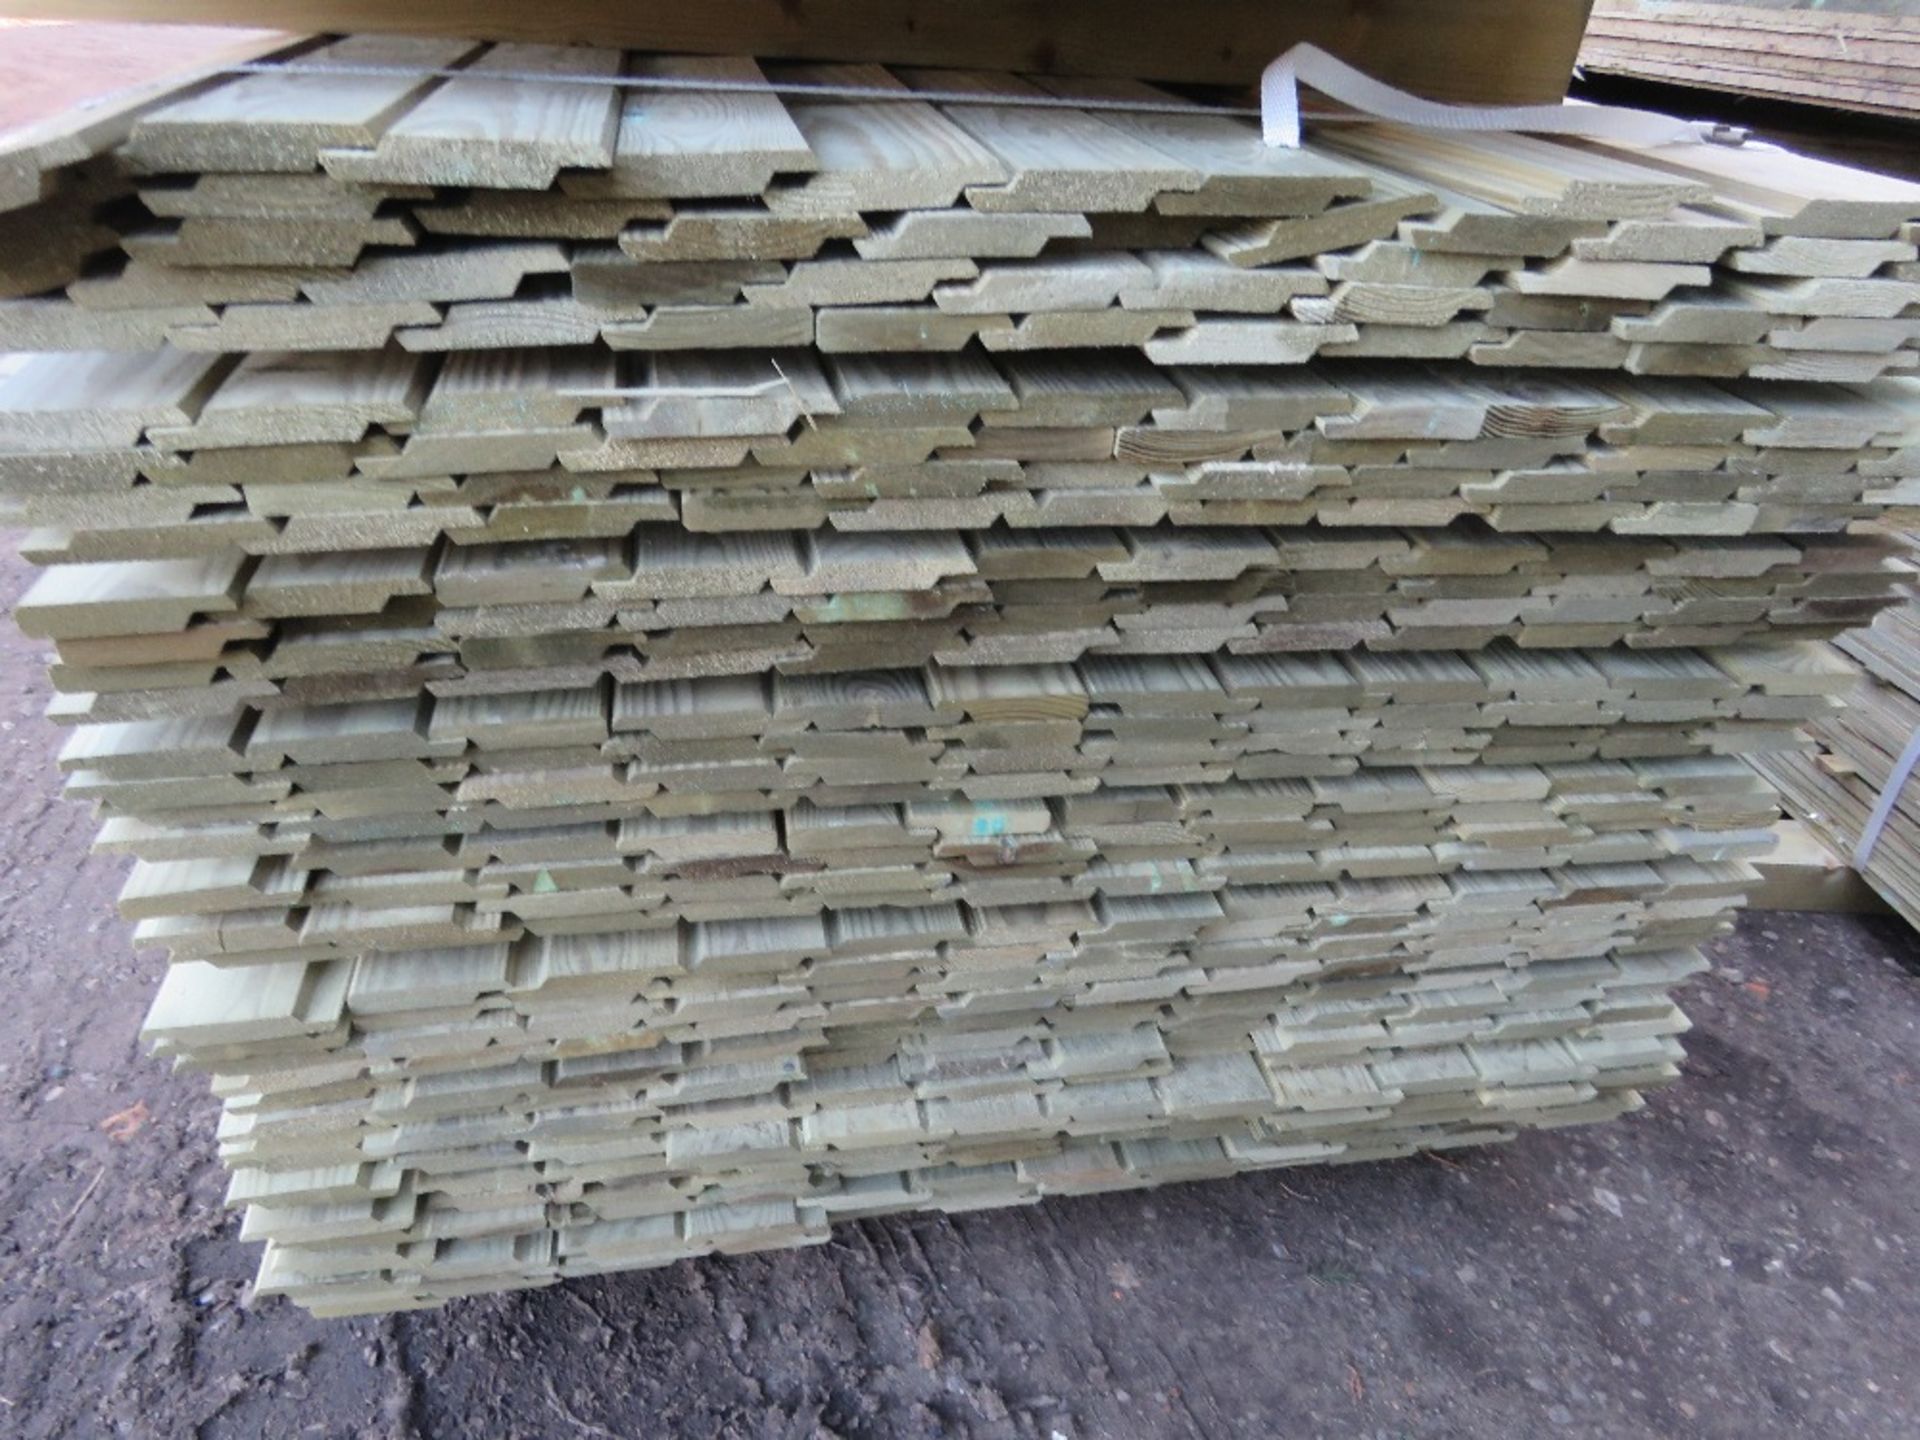 LARGE PACK OF TREATED SHIPLAP FENCE CLADDING TIMBER BOARDS. SIZE: 1.83M LENGTH X 10CM WIDTH APPROX. - Image 2 of 3